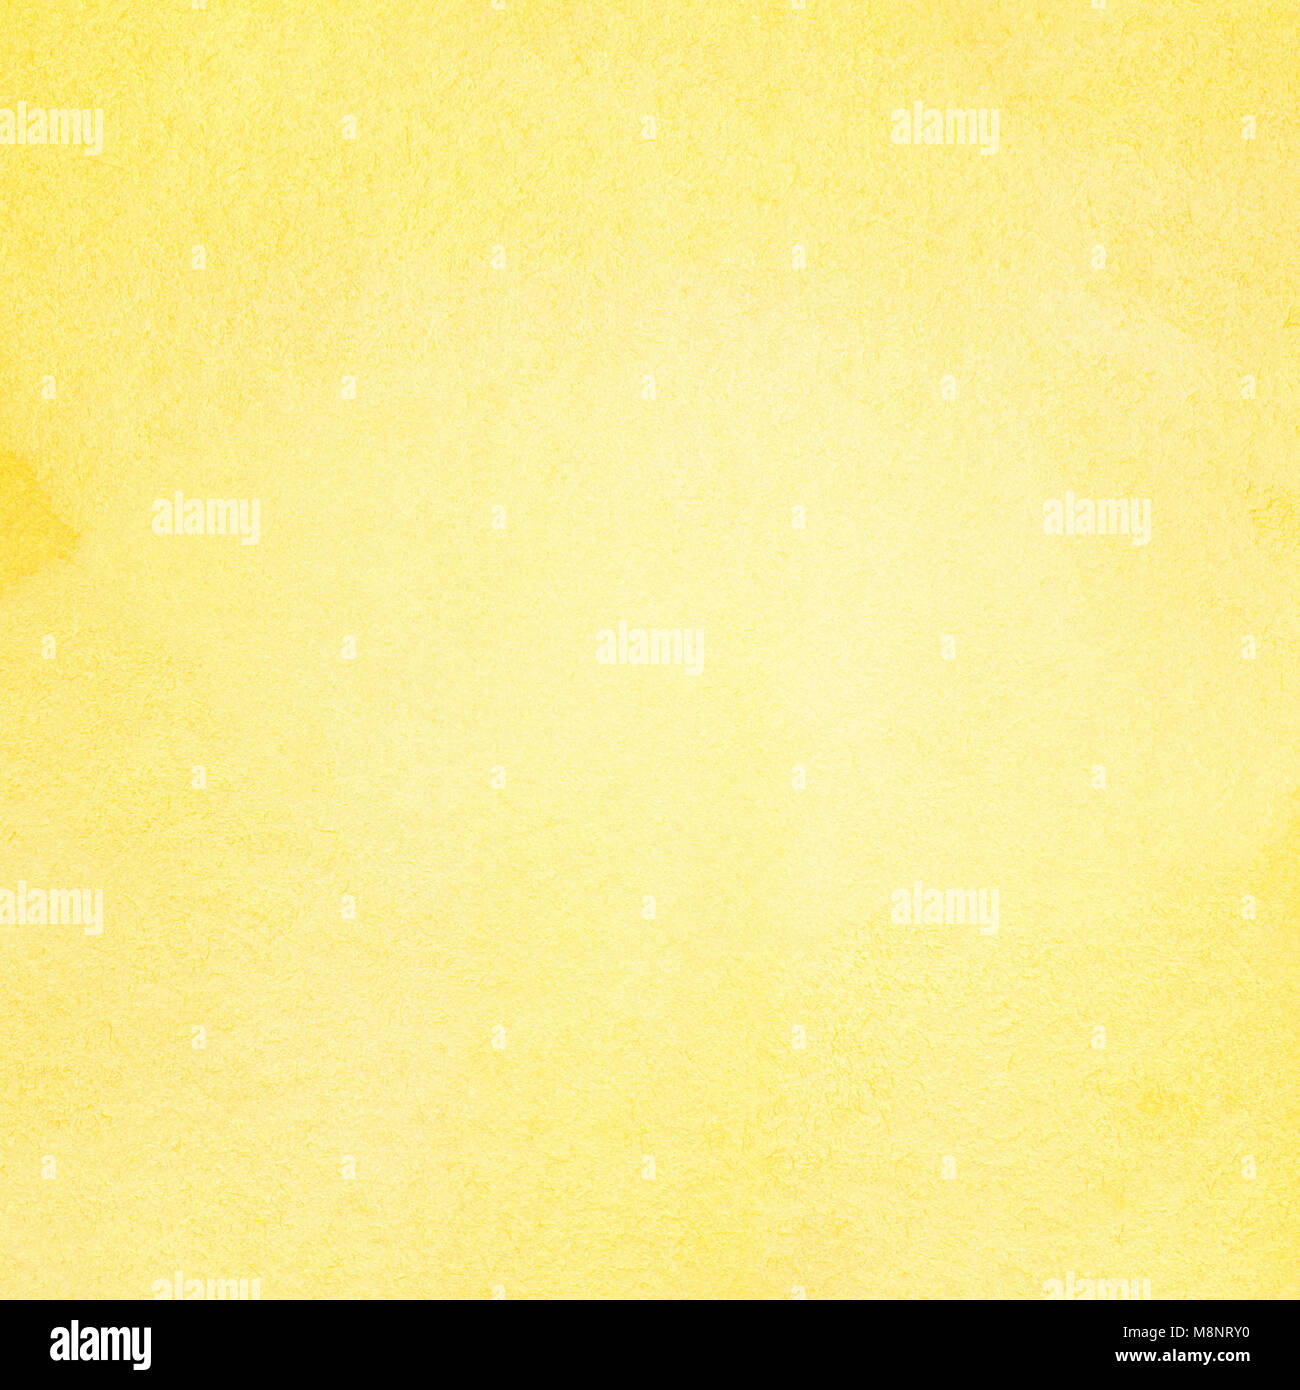 Abstract light yellow watercolor background, painted on watercolor paper Stock Photo